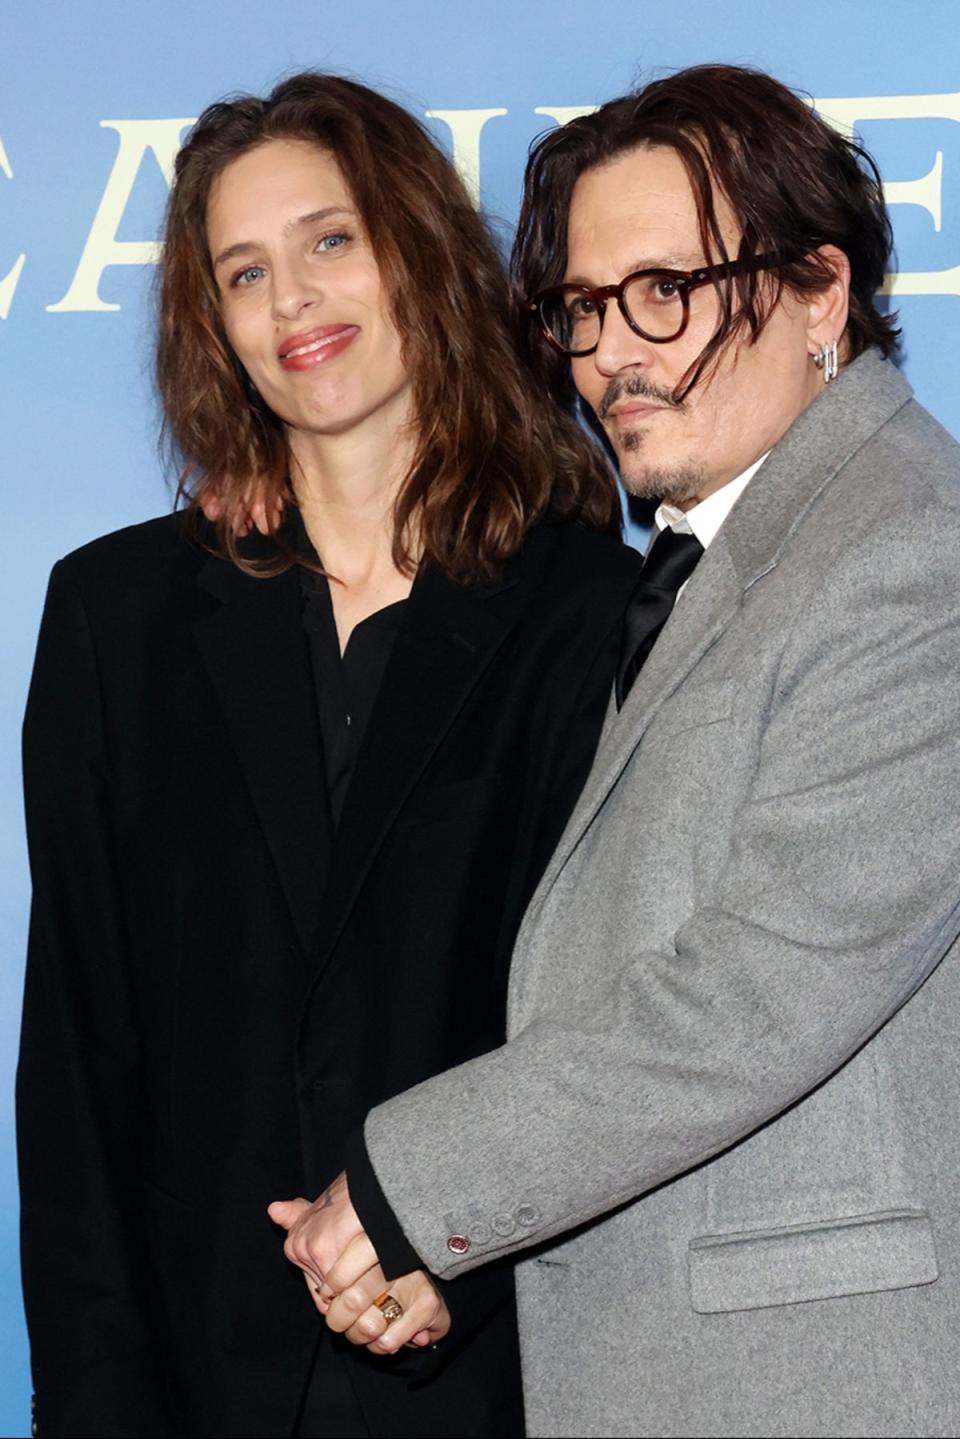 Grin and bear it: Maïwenn and Johnny Depp at their film’s London premiere this week (Getty)